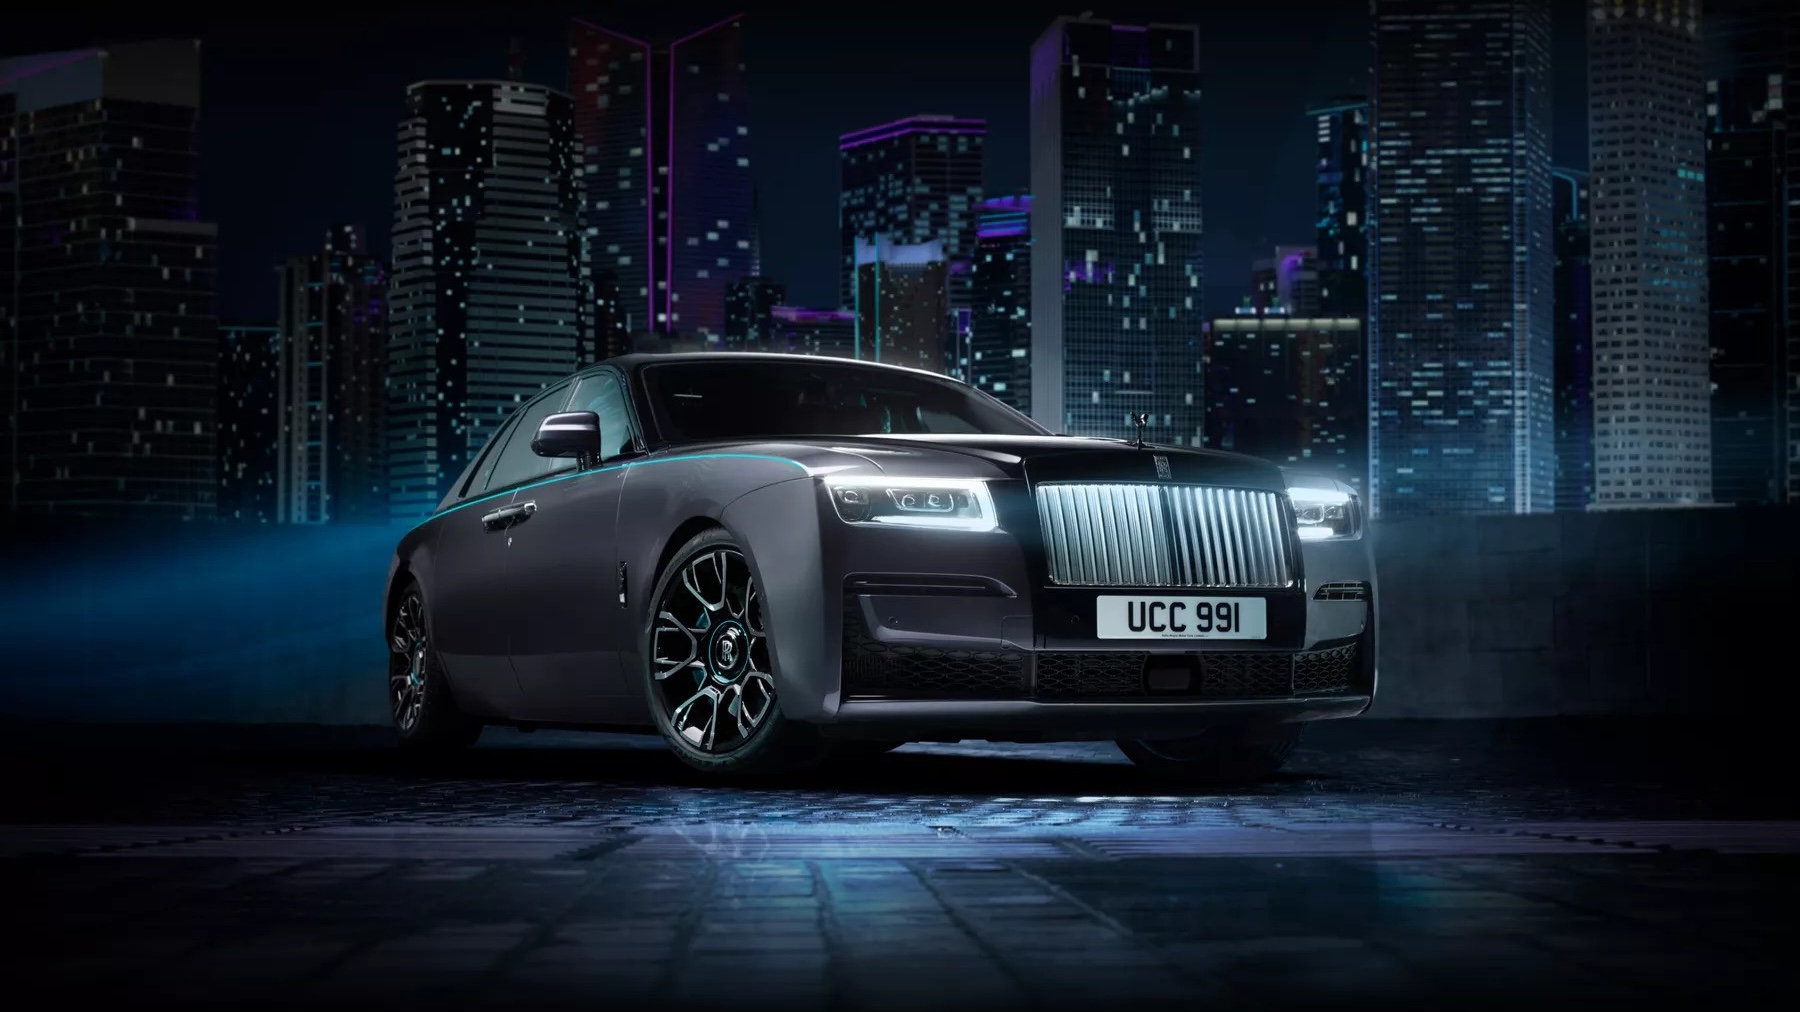 Evolution Of The Rolls-Royce Ghost: History, Generations, Models & More